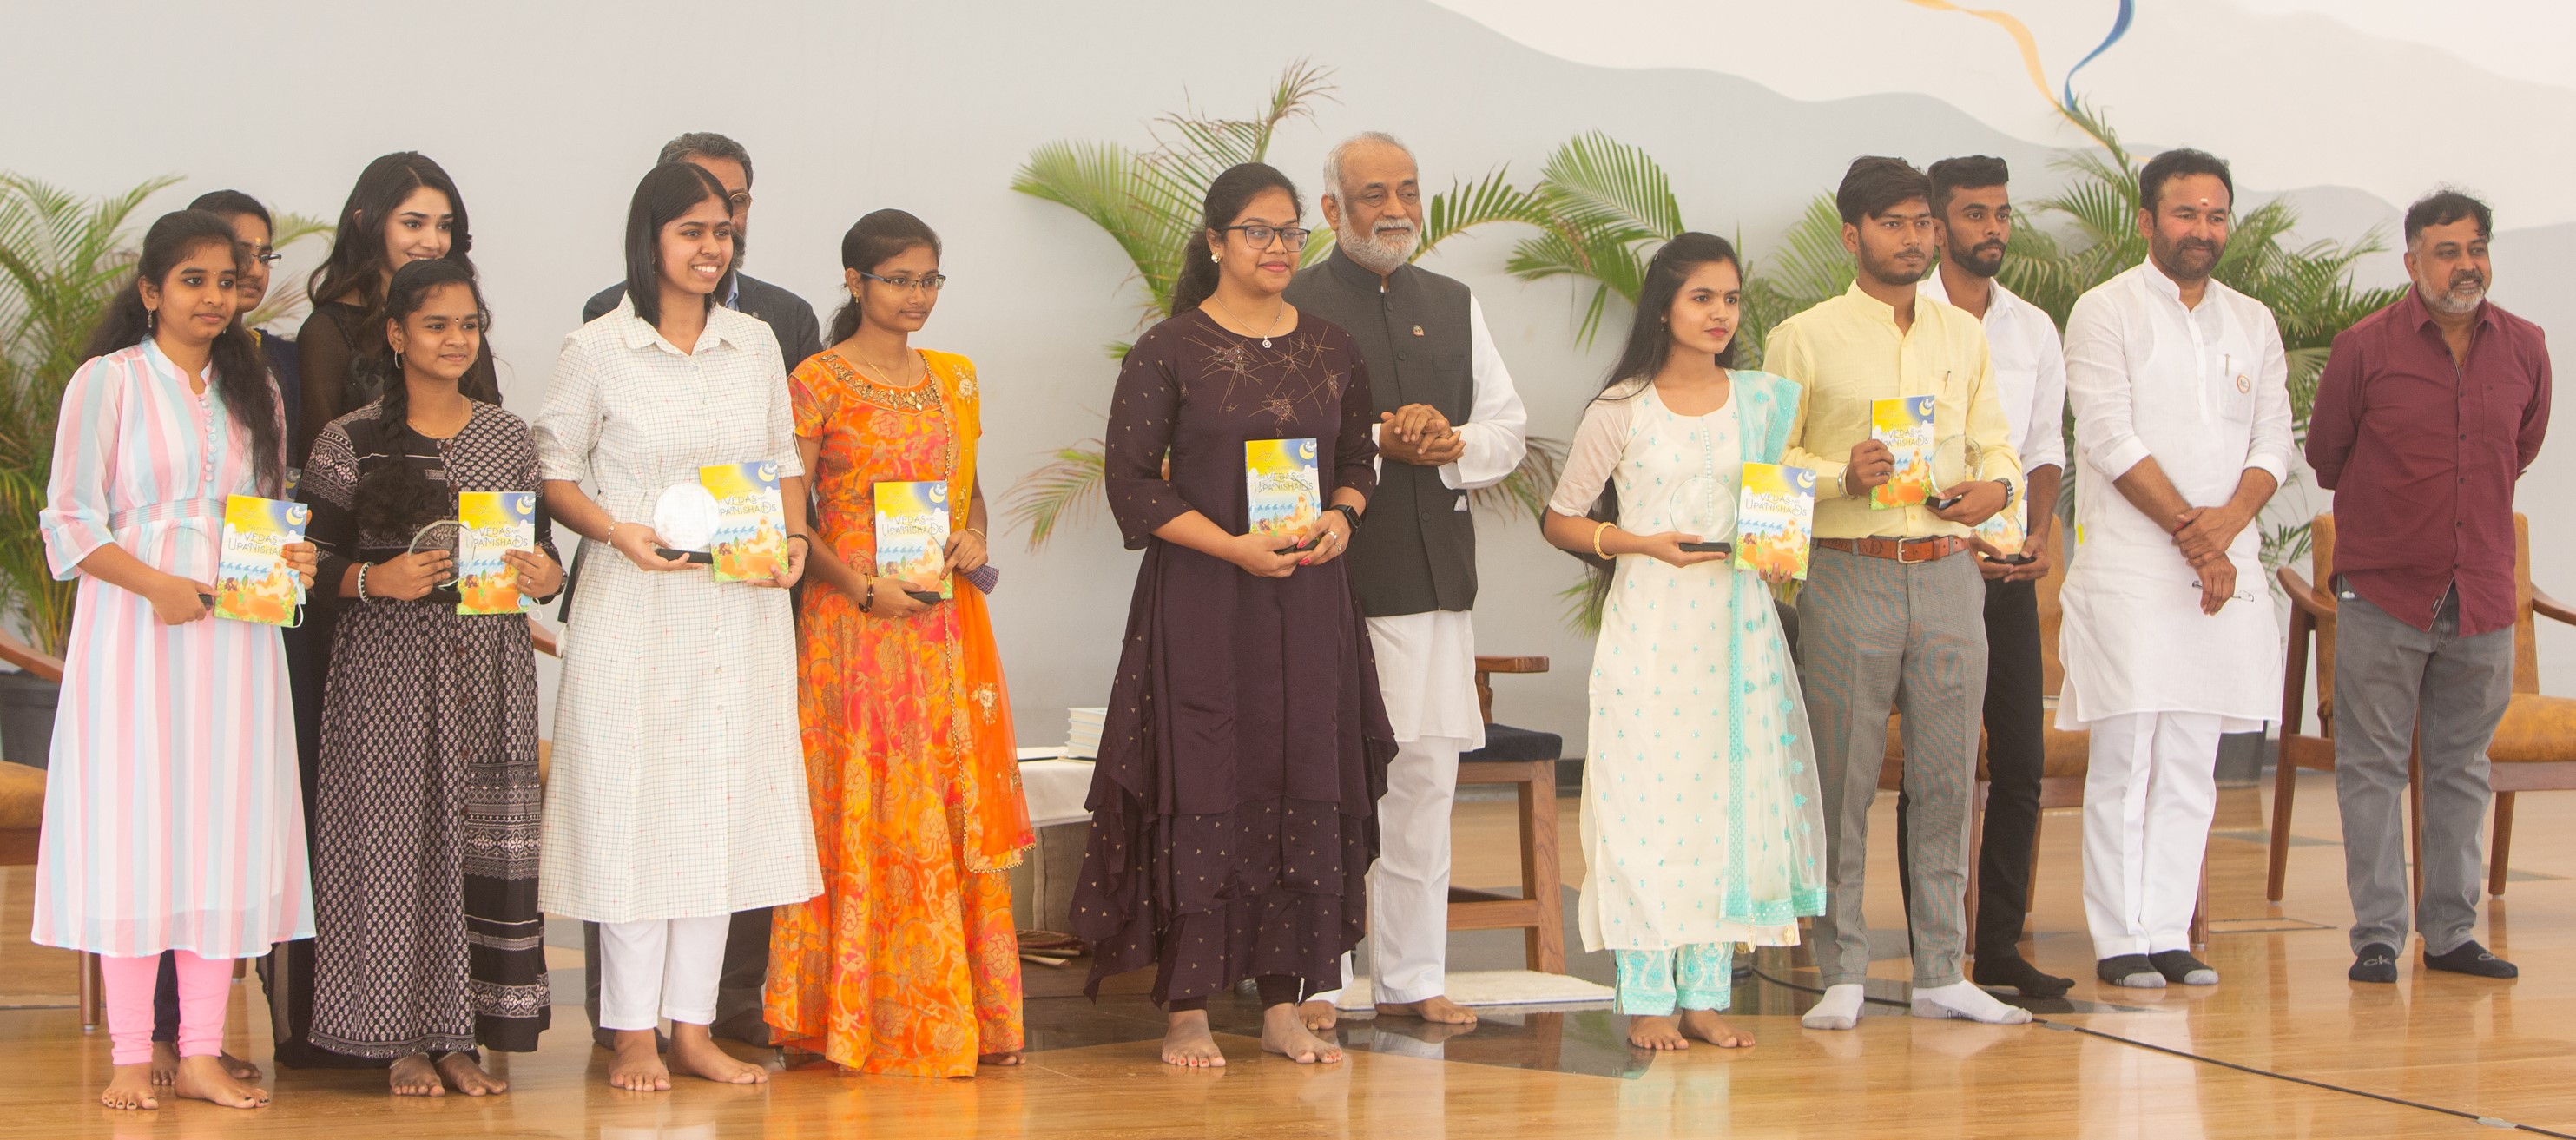 Heartfulness Education Trust hosts Award ceremony for the  29th edition of the Global Essay event